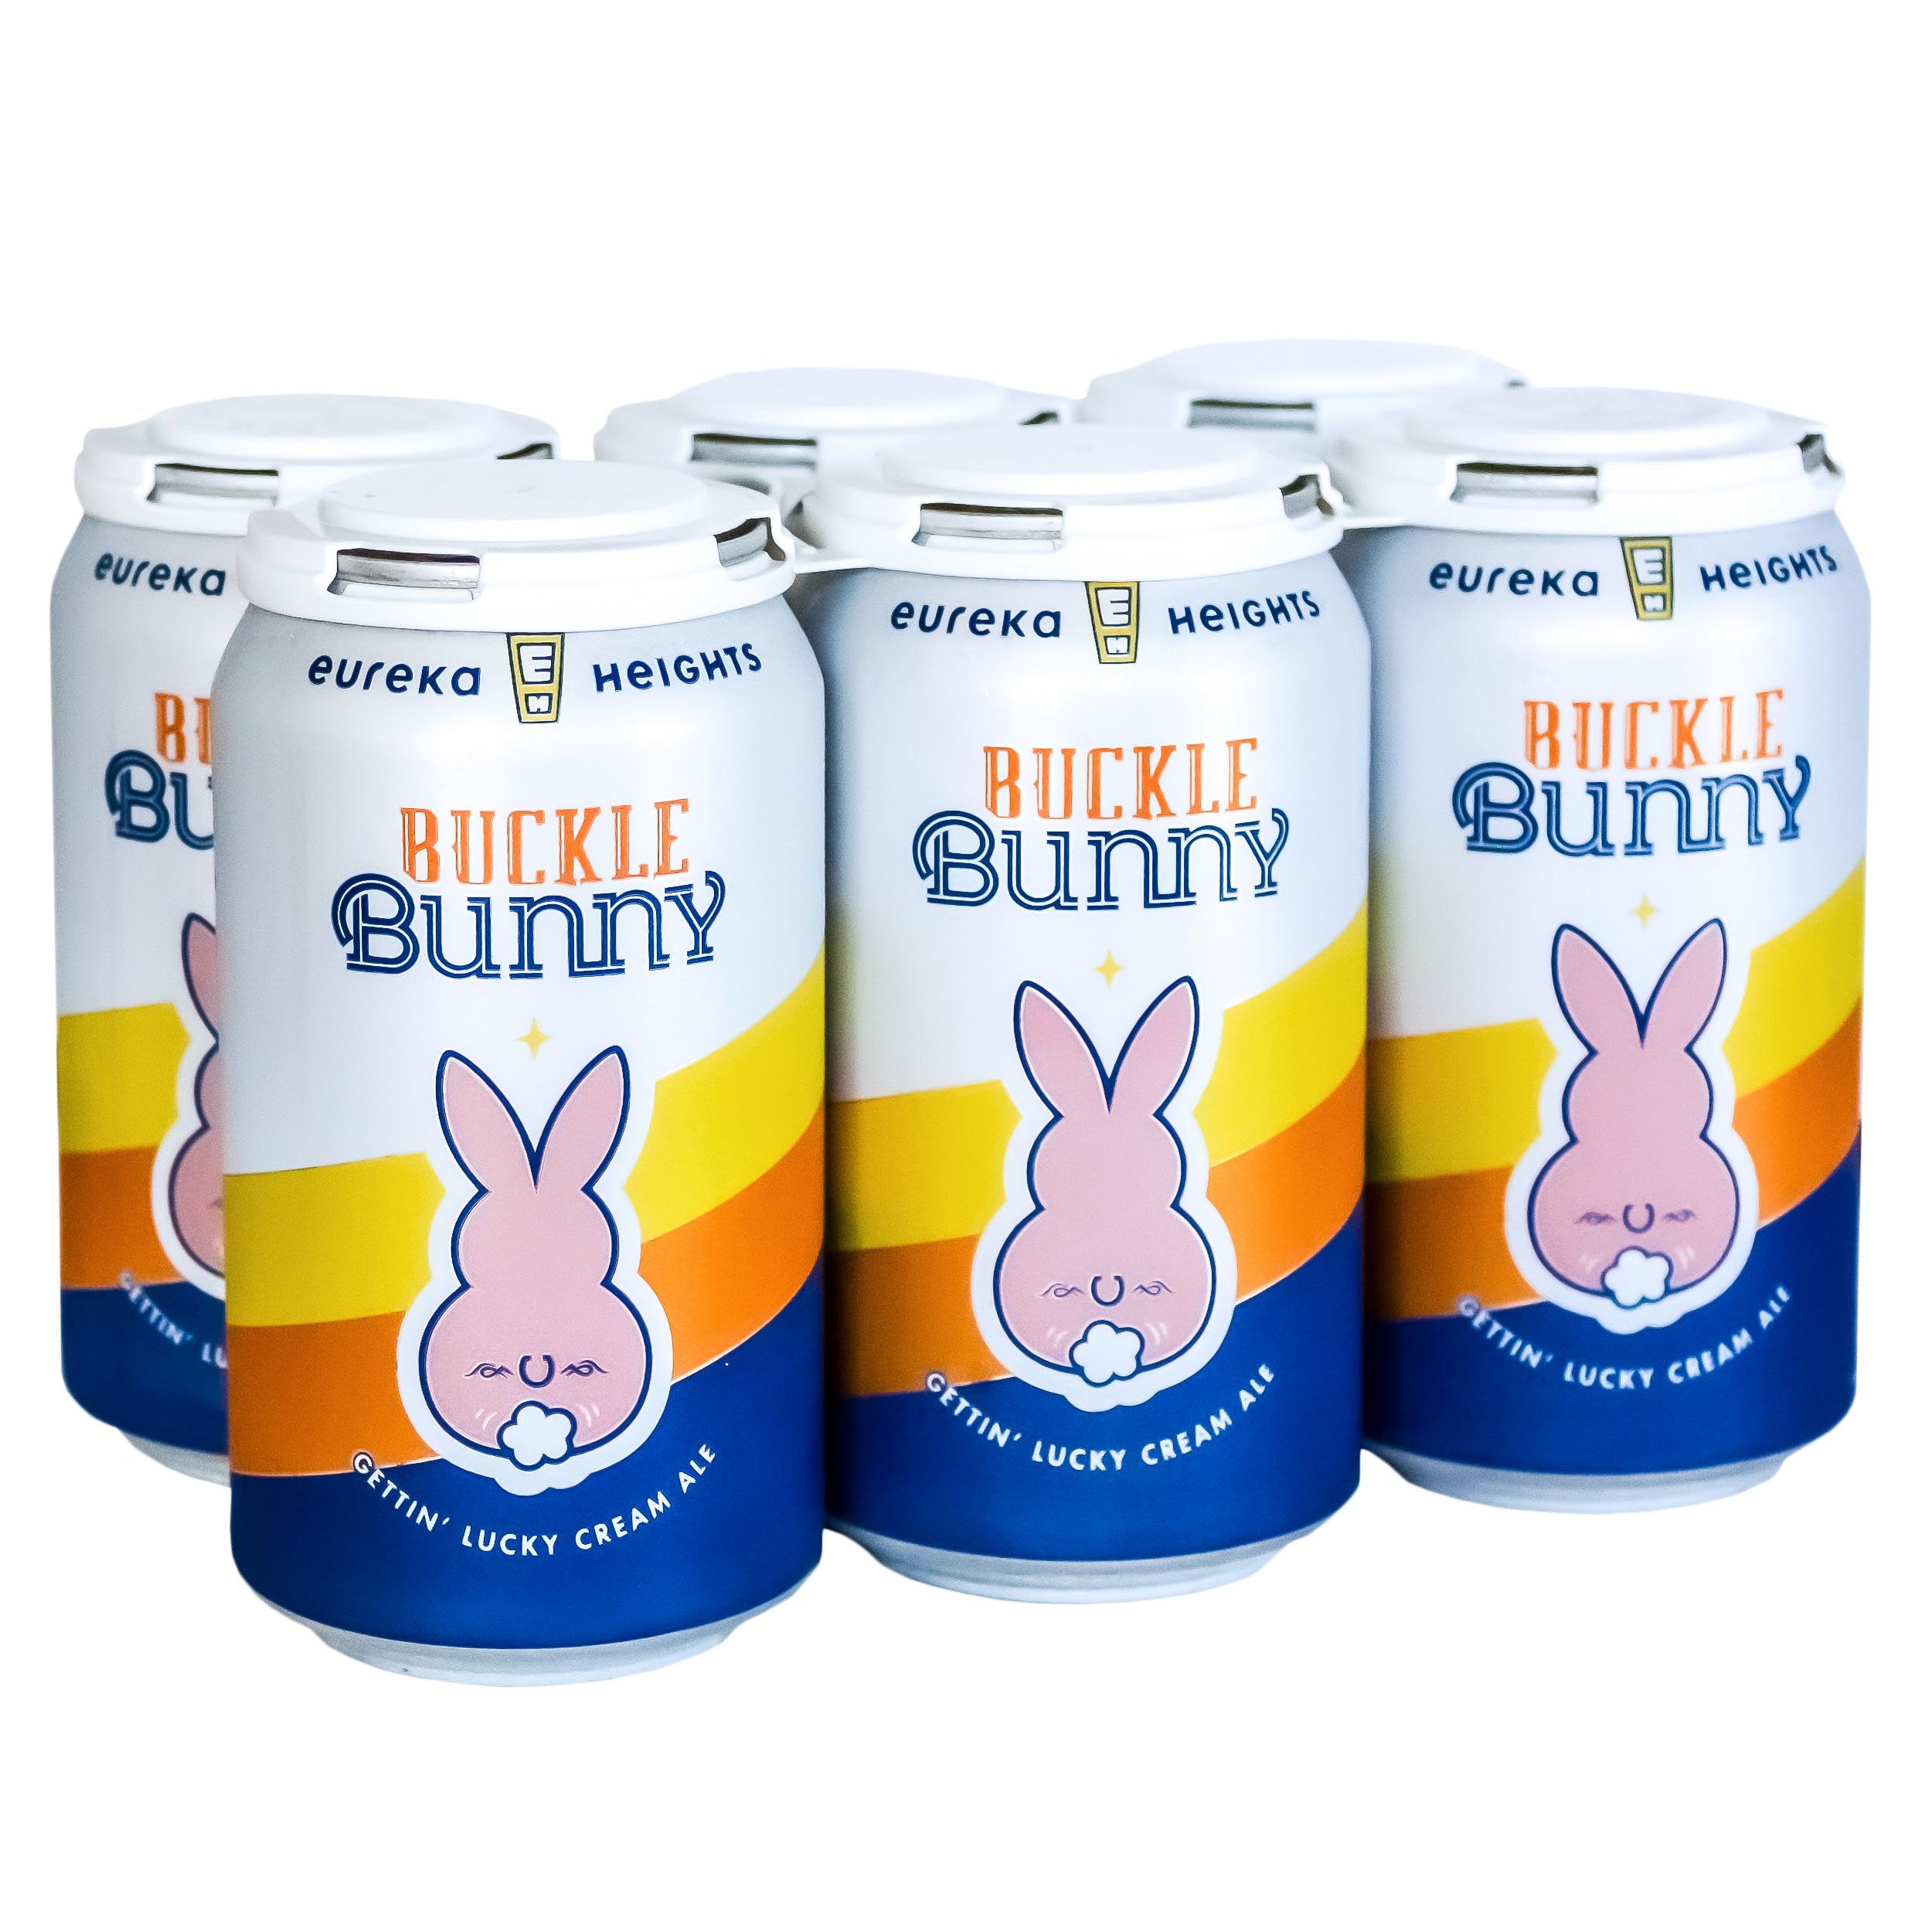 Buckle bunny pictures Eureka Heights Buckle Bunny Cream Ale Beer 12 Oz Cans Shop Beer At H E B